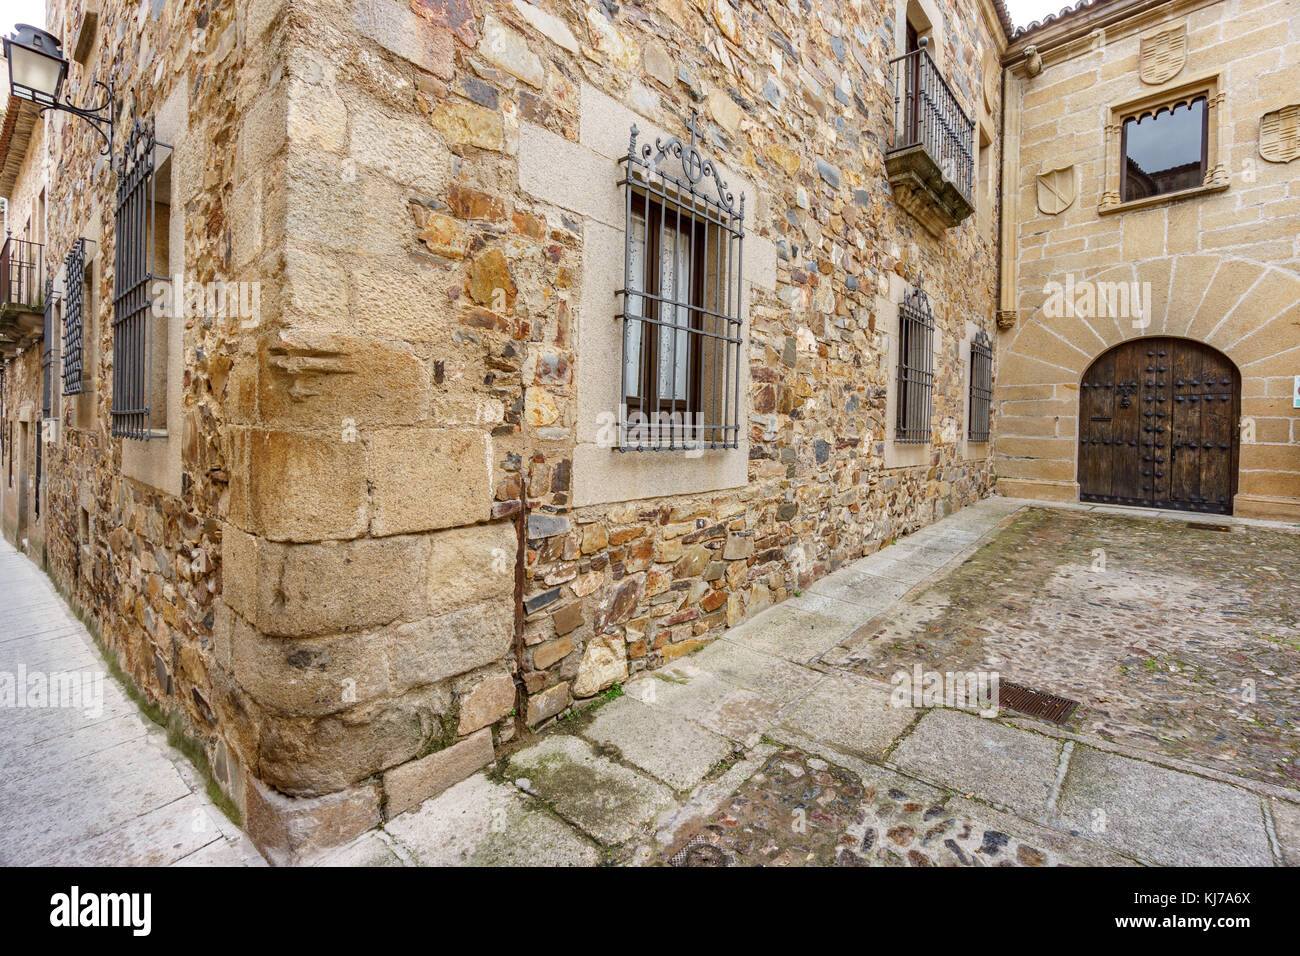 Small streets for large historical buildings, Caceres Spain Stock Photo